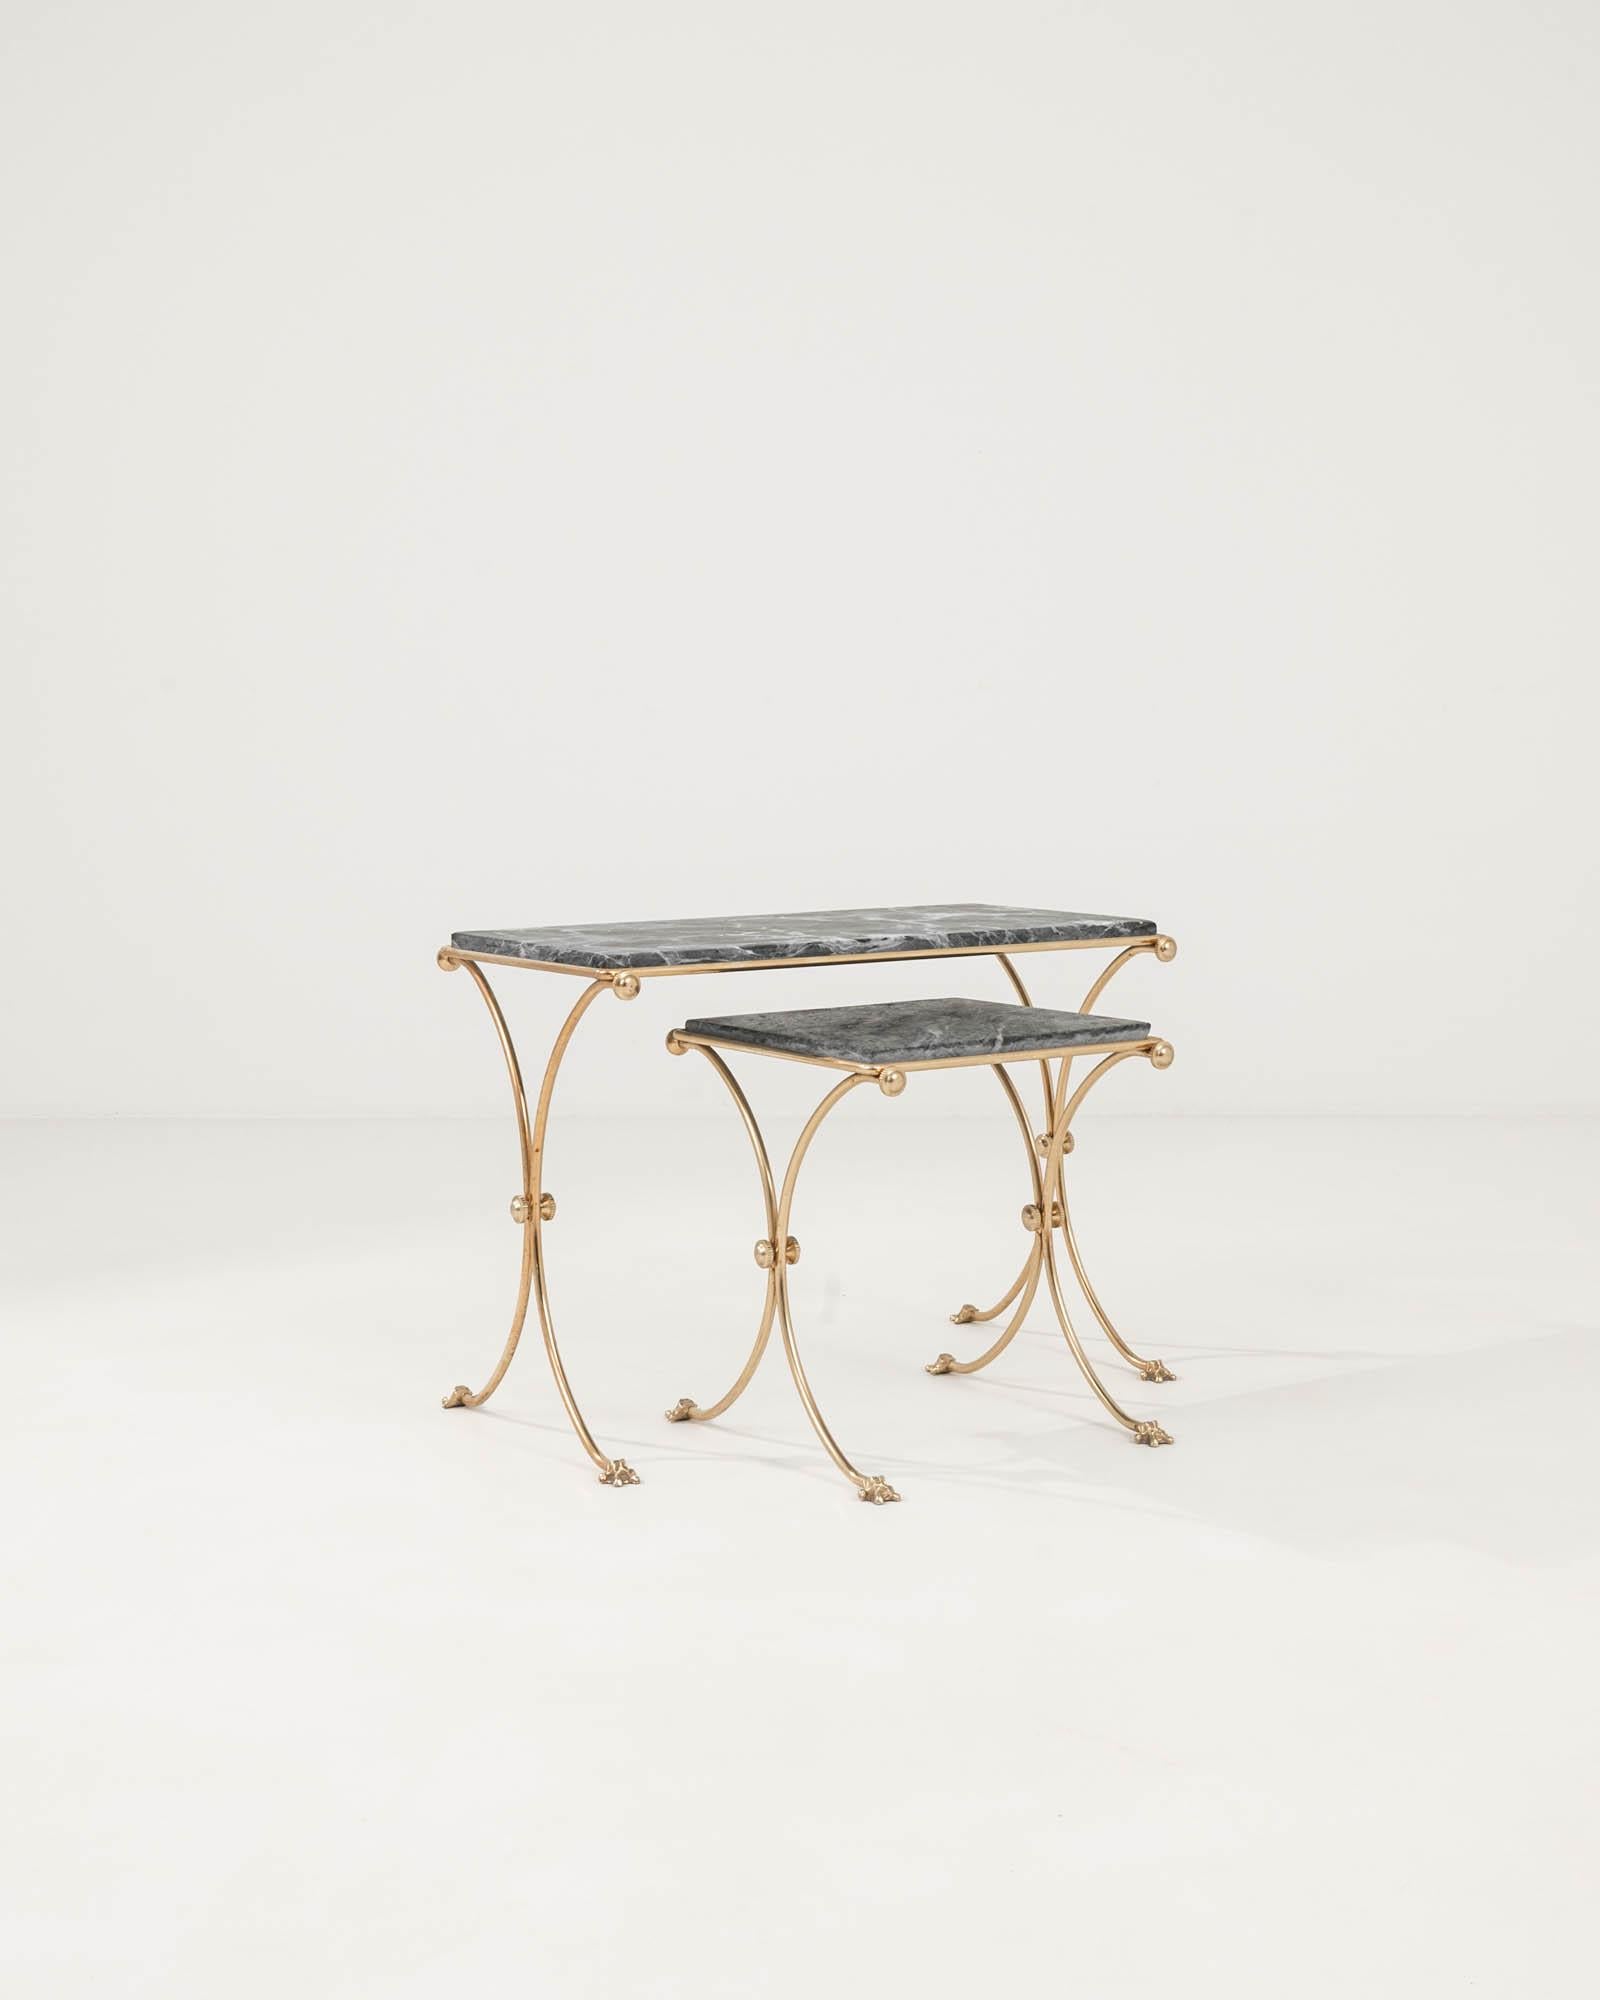 Introducing our exquisite 20th Century French Brass & Marble Nesting Tables, a luxurious addition to any living space. Crafted with meticulous attention to detail, this set of two tables showcases the timeless elegance of antique design. Each table